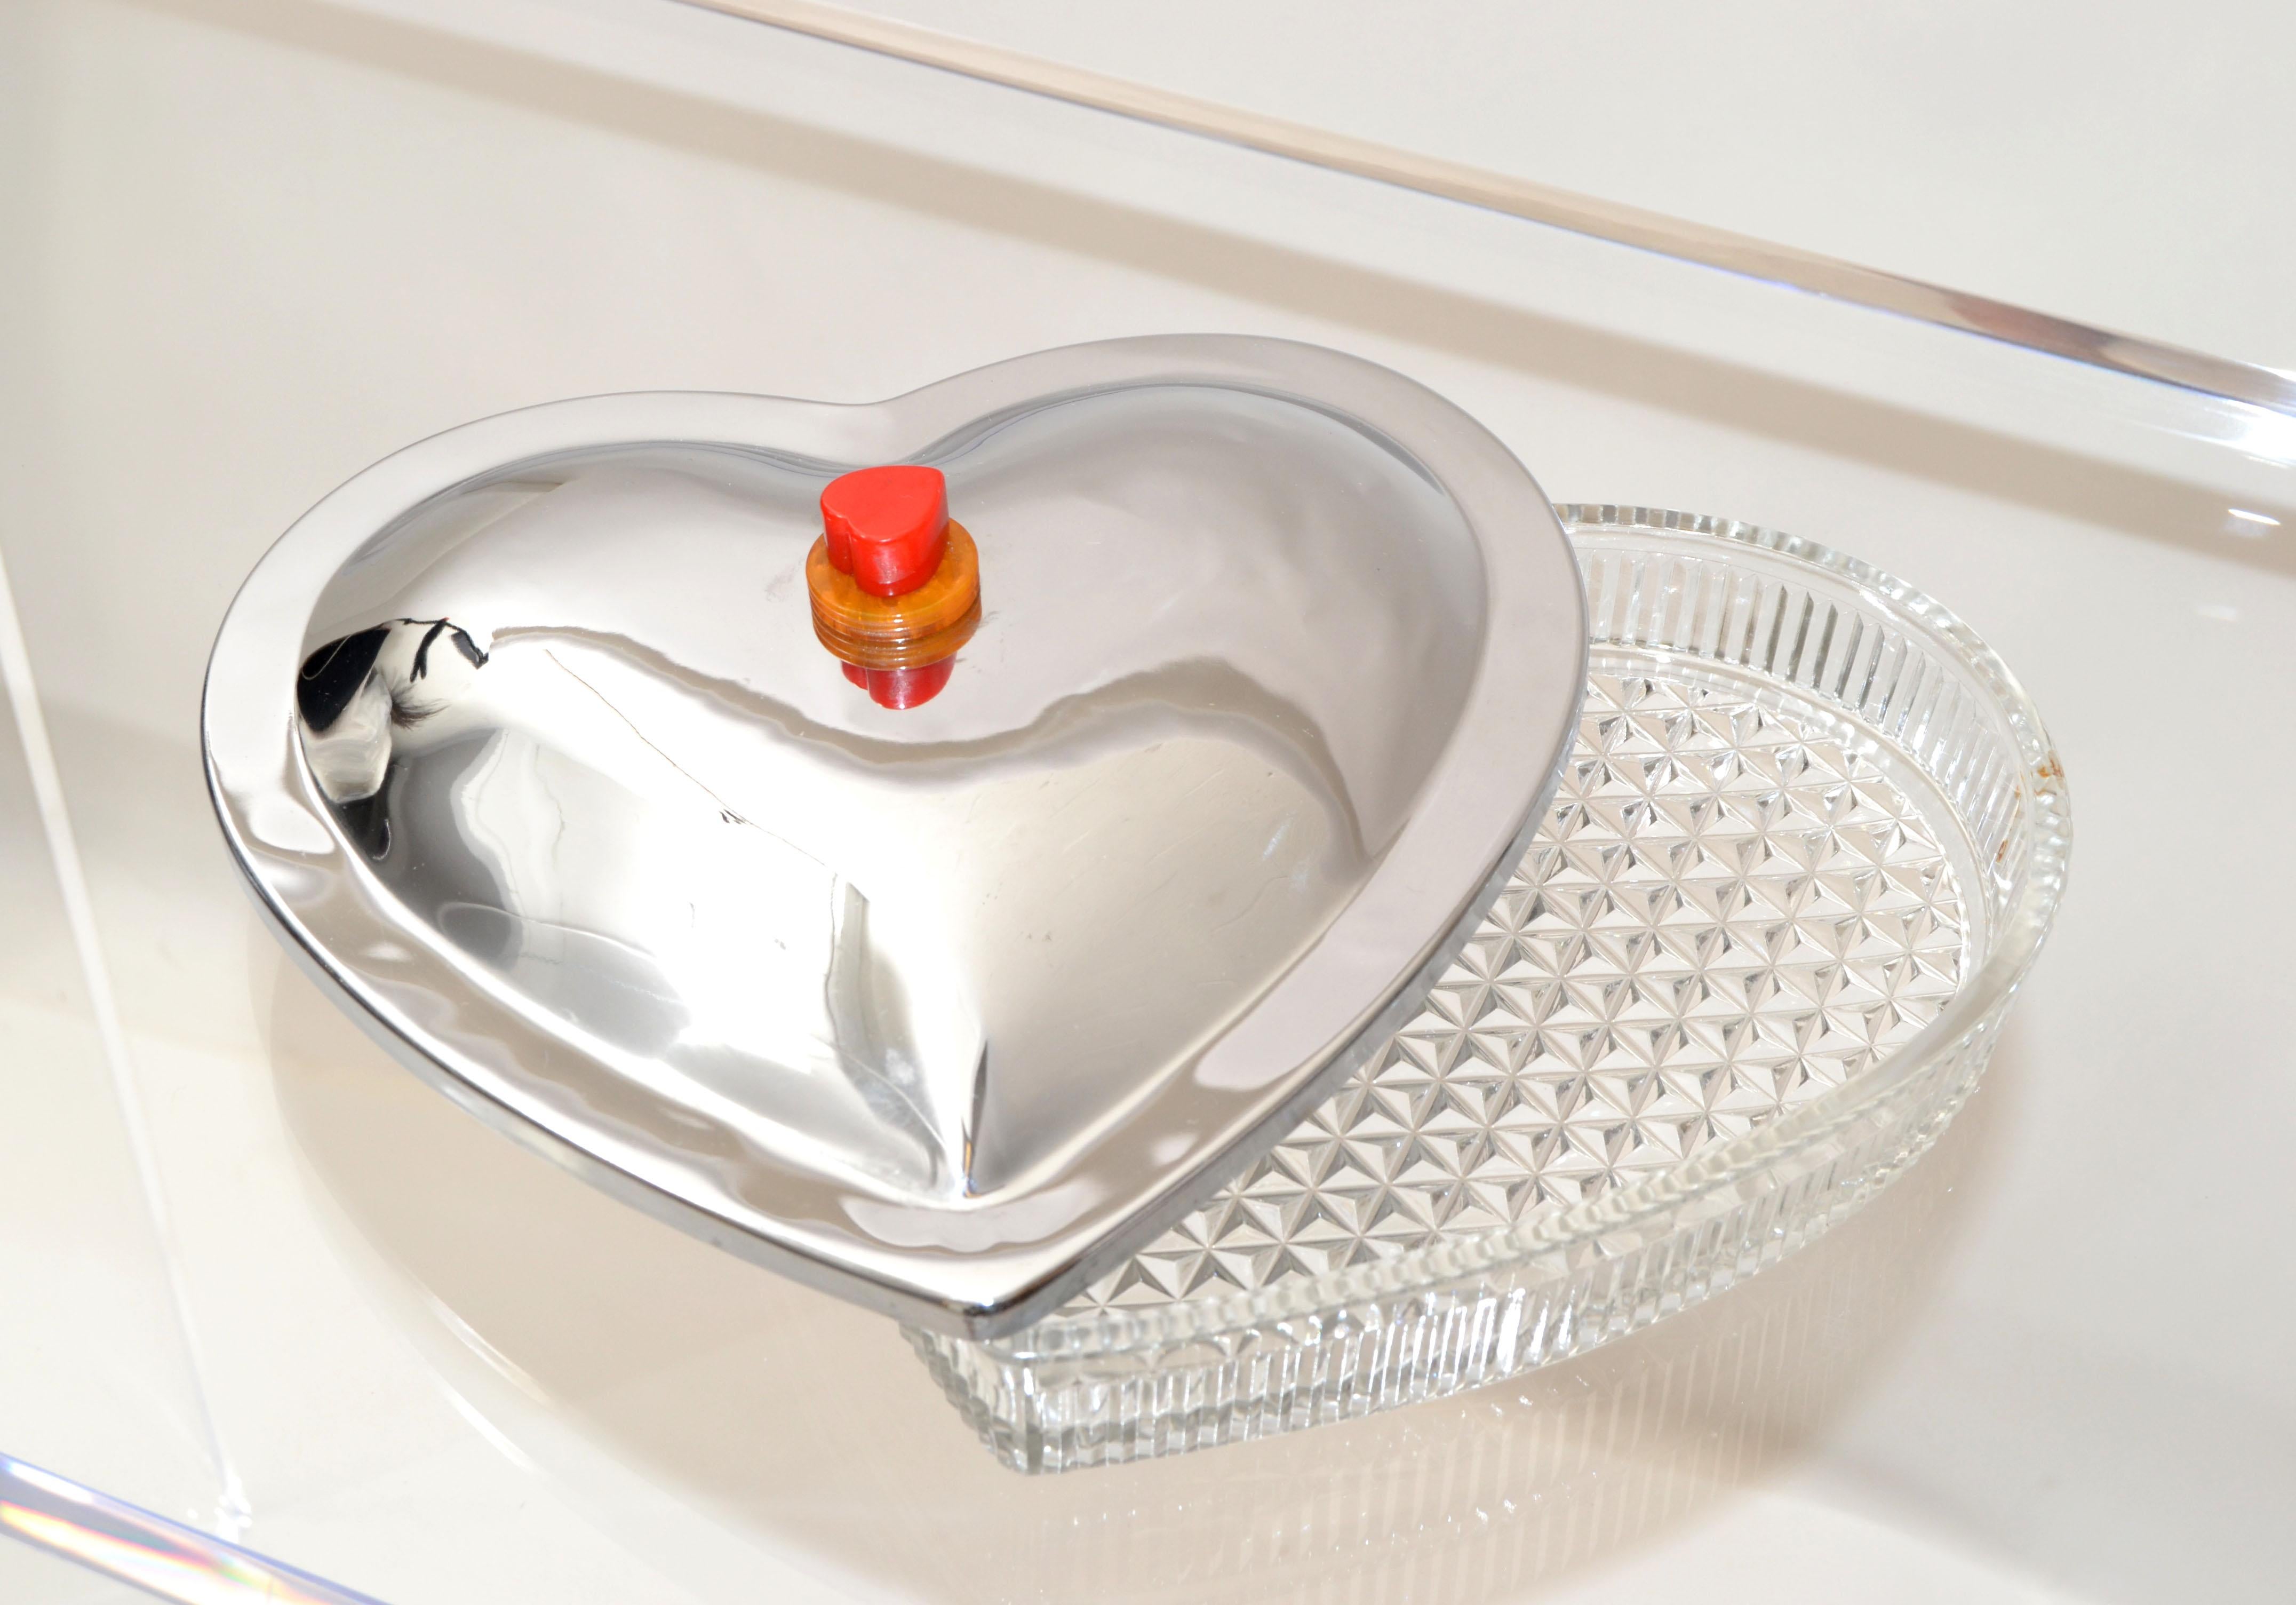 Lovely Mother's Day or wedding gift idea.
Cut Glass Heart shaped Serving Dish with lid made out of Stainless Steel.
Has a hand carved red alabaster and amber color Bakelite heart as knob.
Great for serving chocolate strawberries at Family